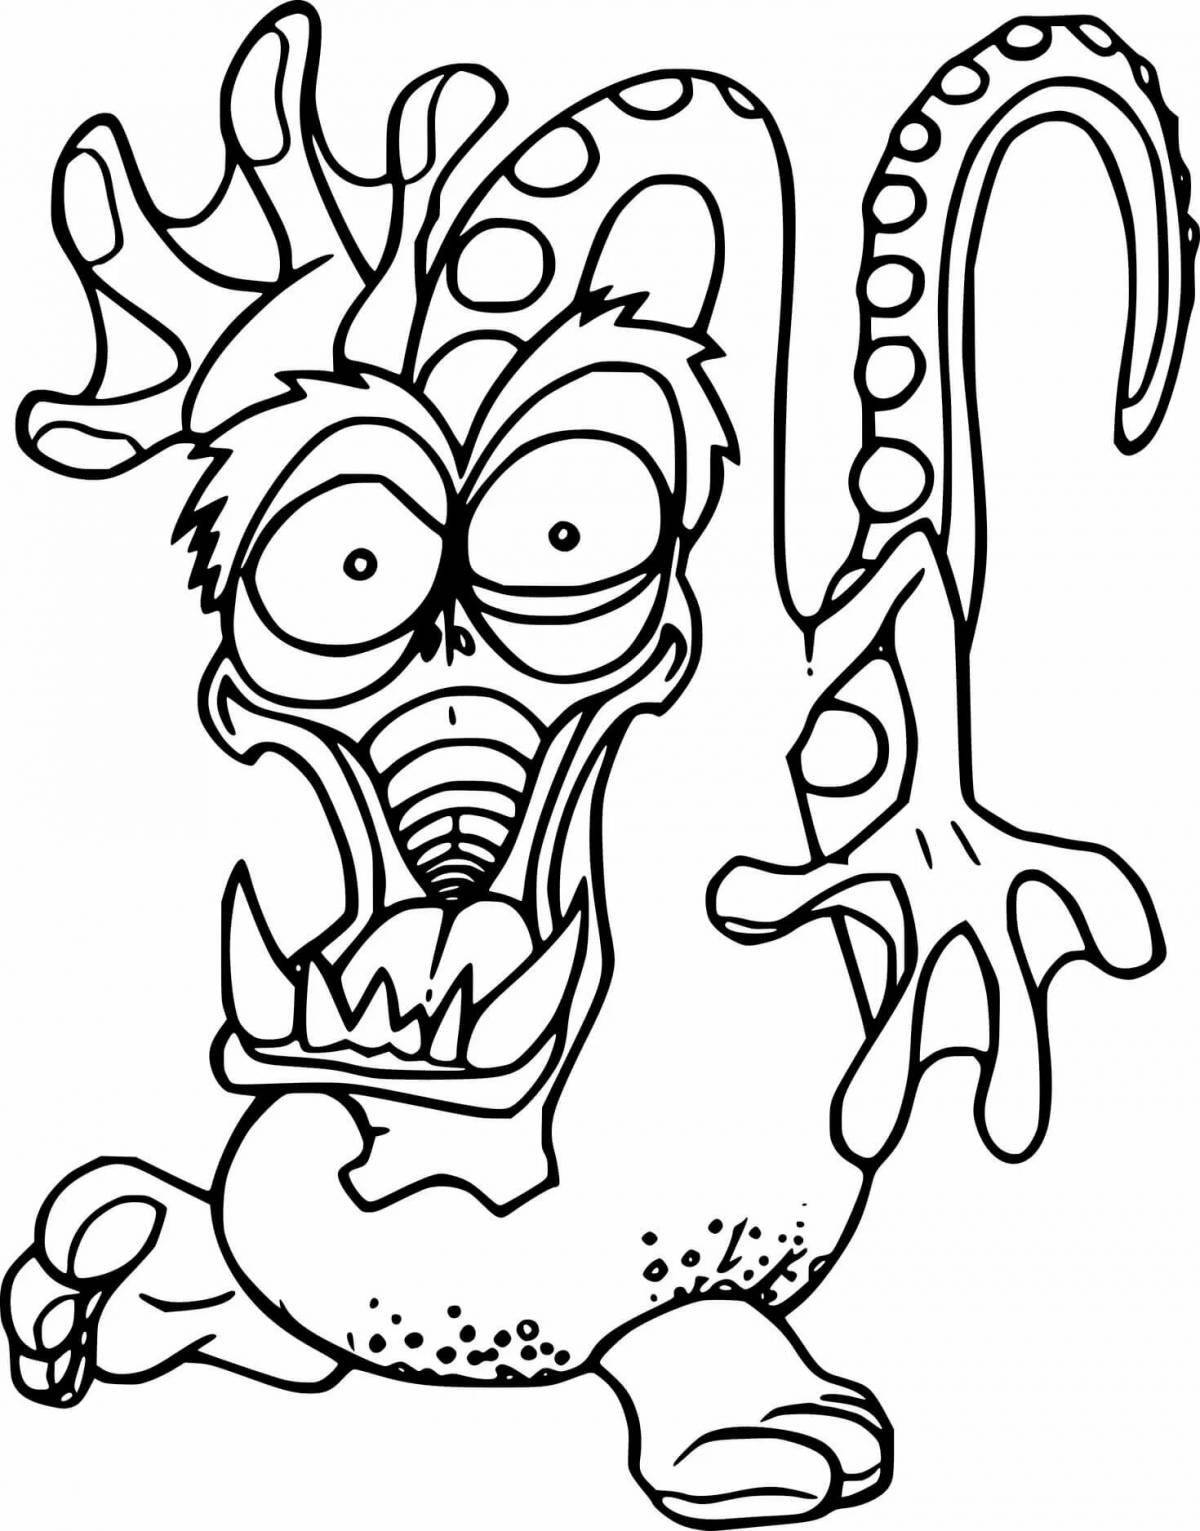 Creepy scary monsters coloring page